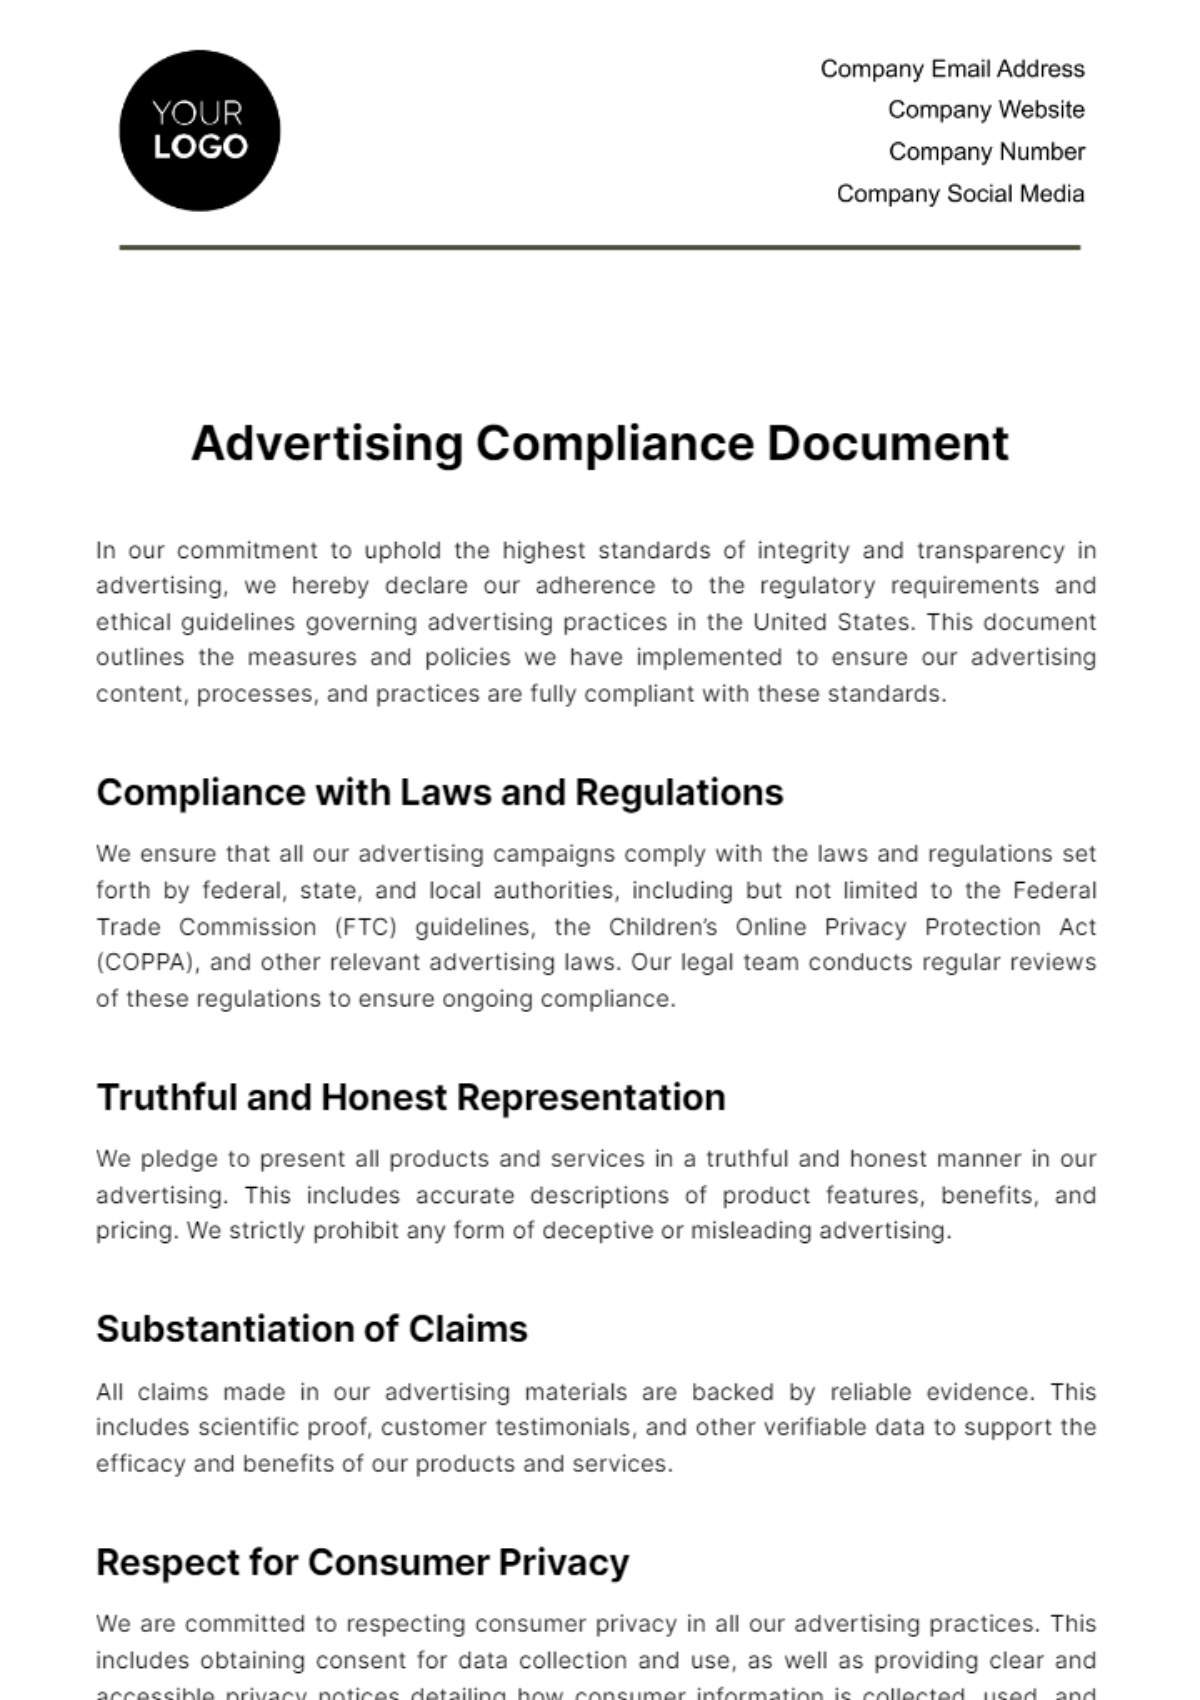 Free Advertising Compliance Document Template